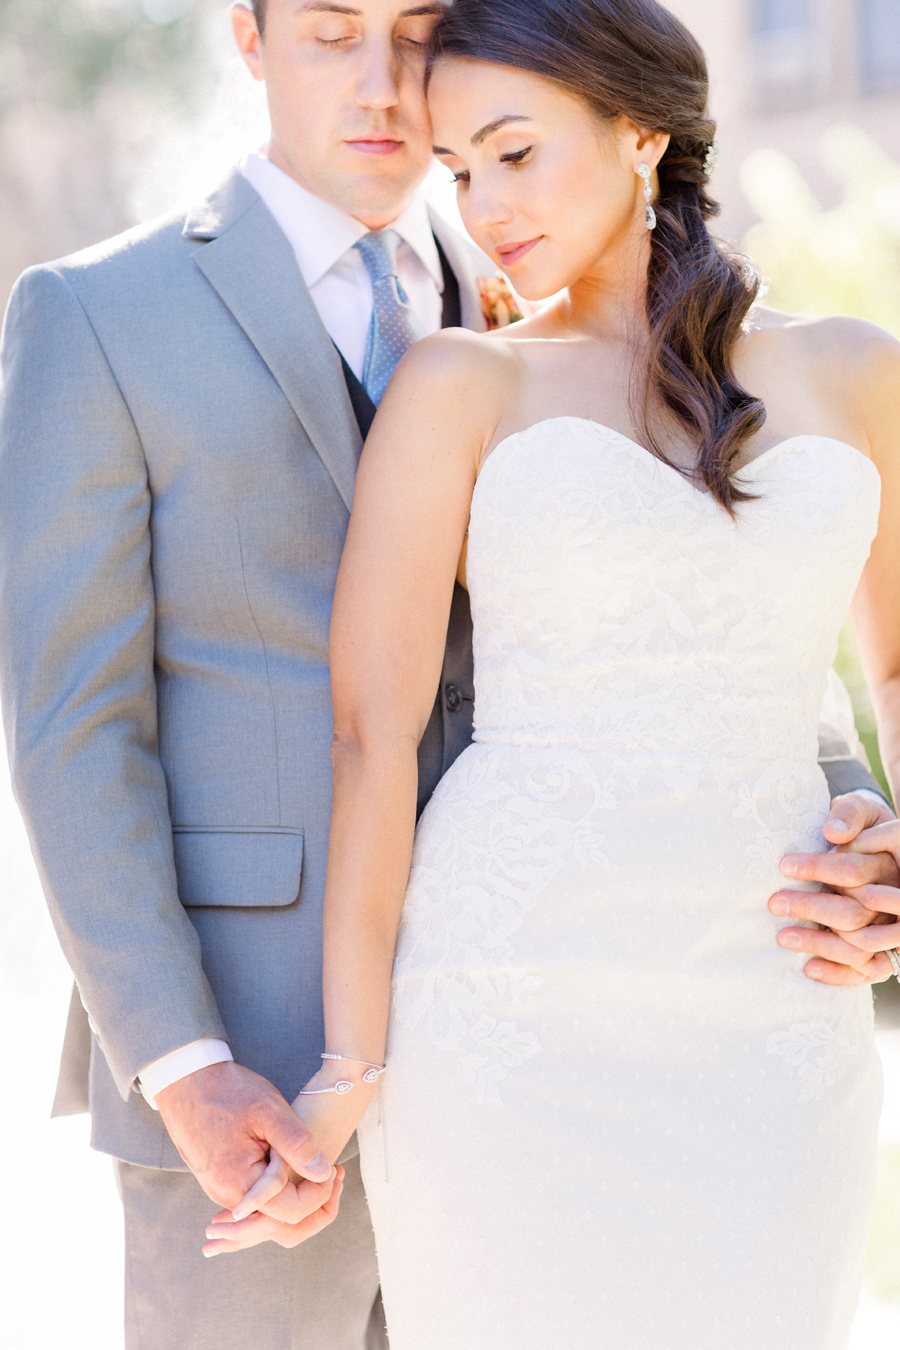 An intimate country club wedding in Columbia, Missouri.